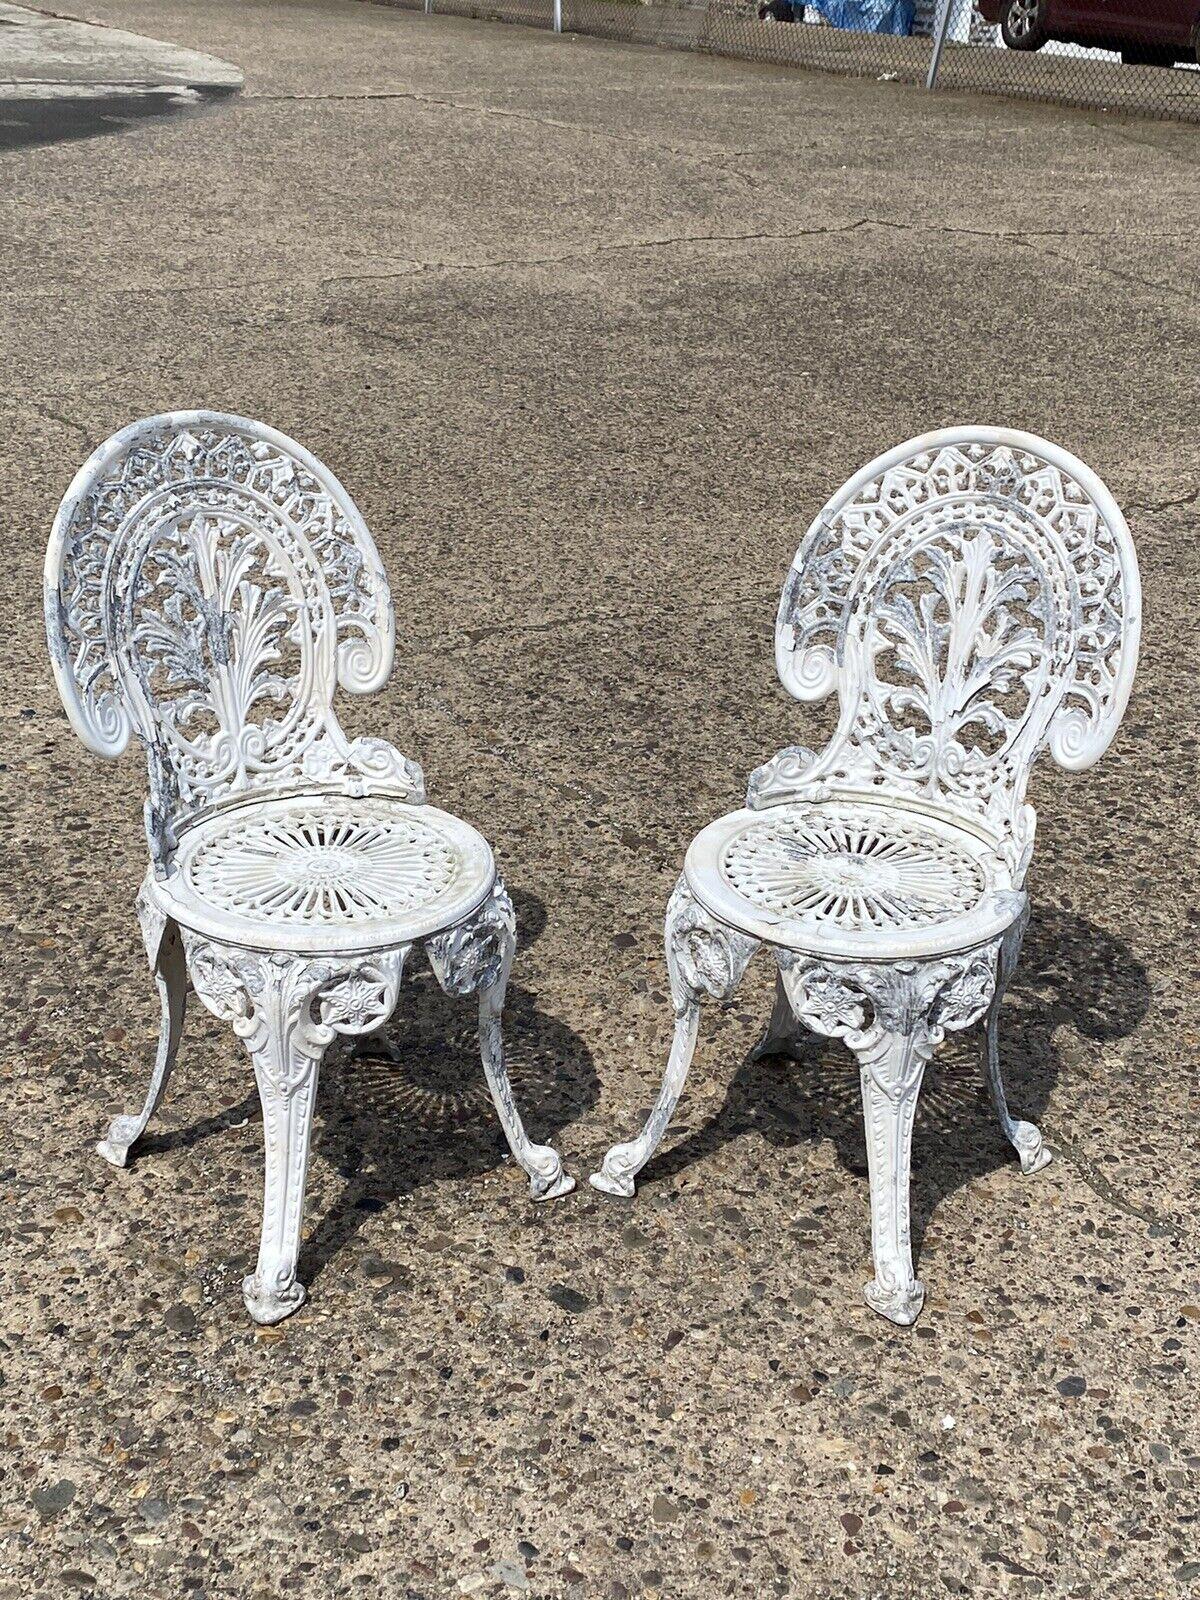 Cast Aluminum Antique Style Outdoor Garden Bistro Small Side Chairs - a Pair (Reproduction). Circa Late 20th - 21st Century.
Measurements: 34